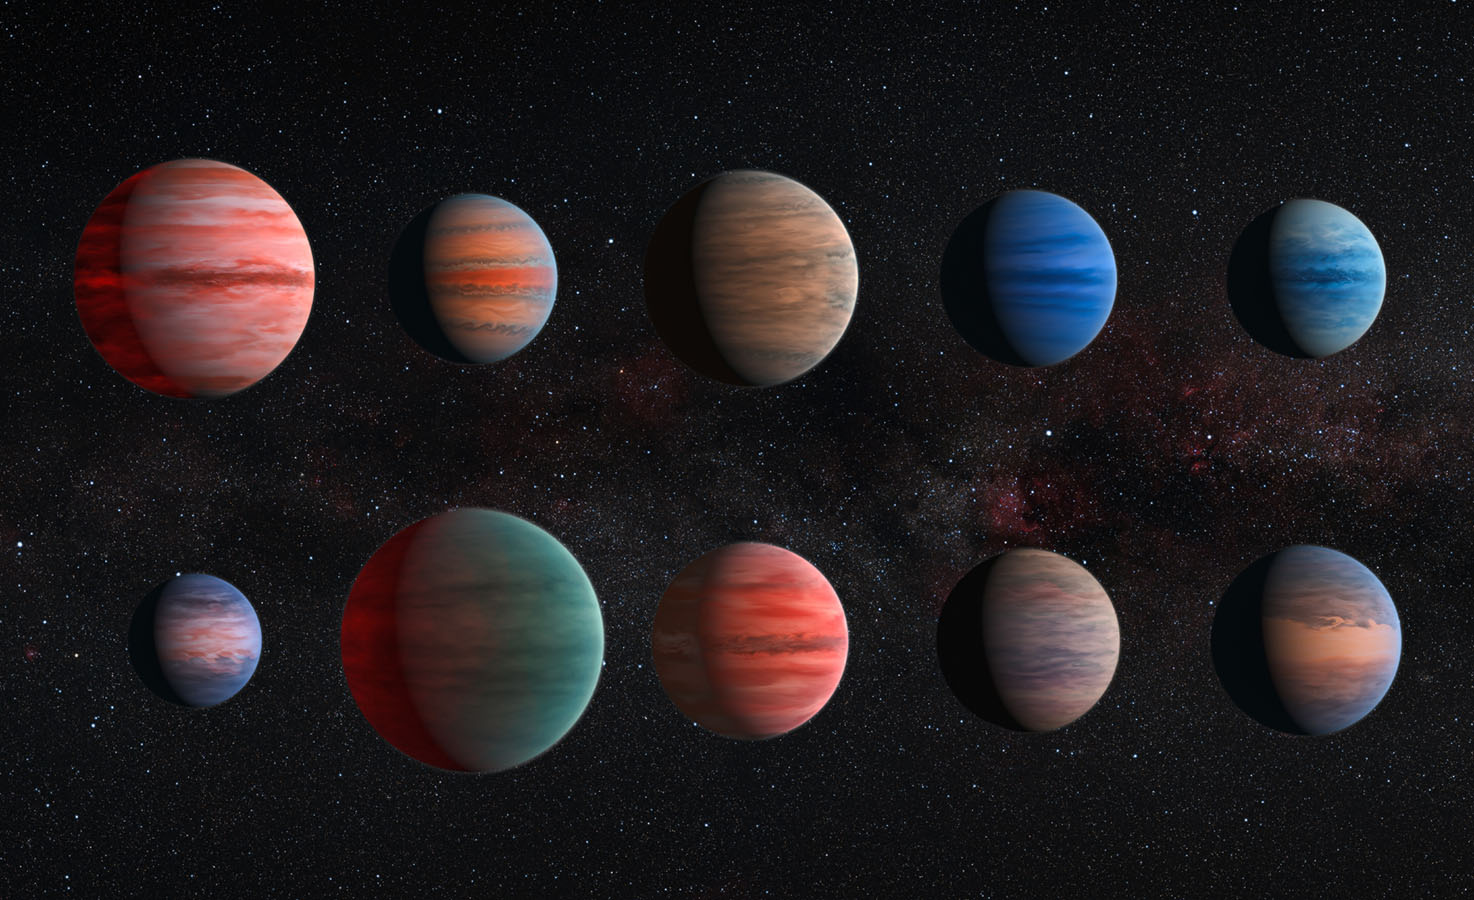 Today's Your Last Chance to Help Name an Alien Solar System!